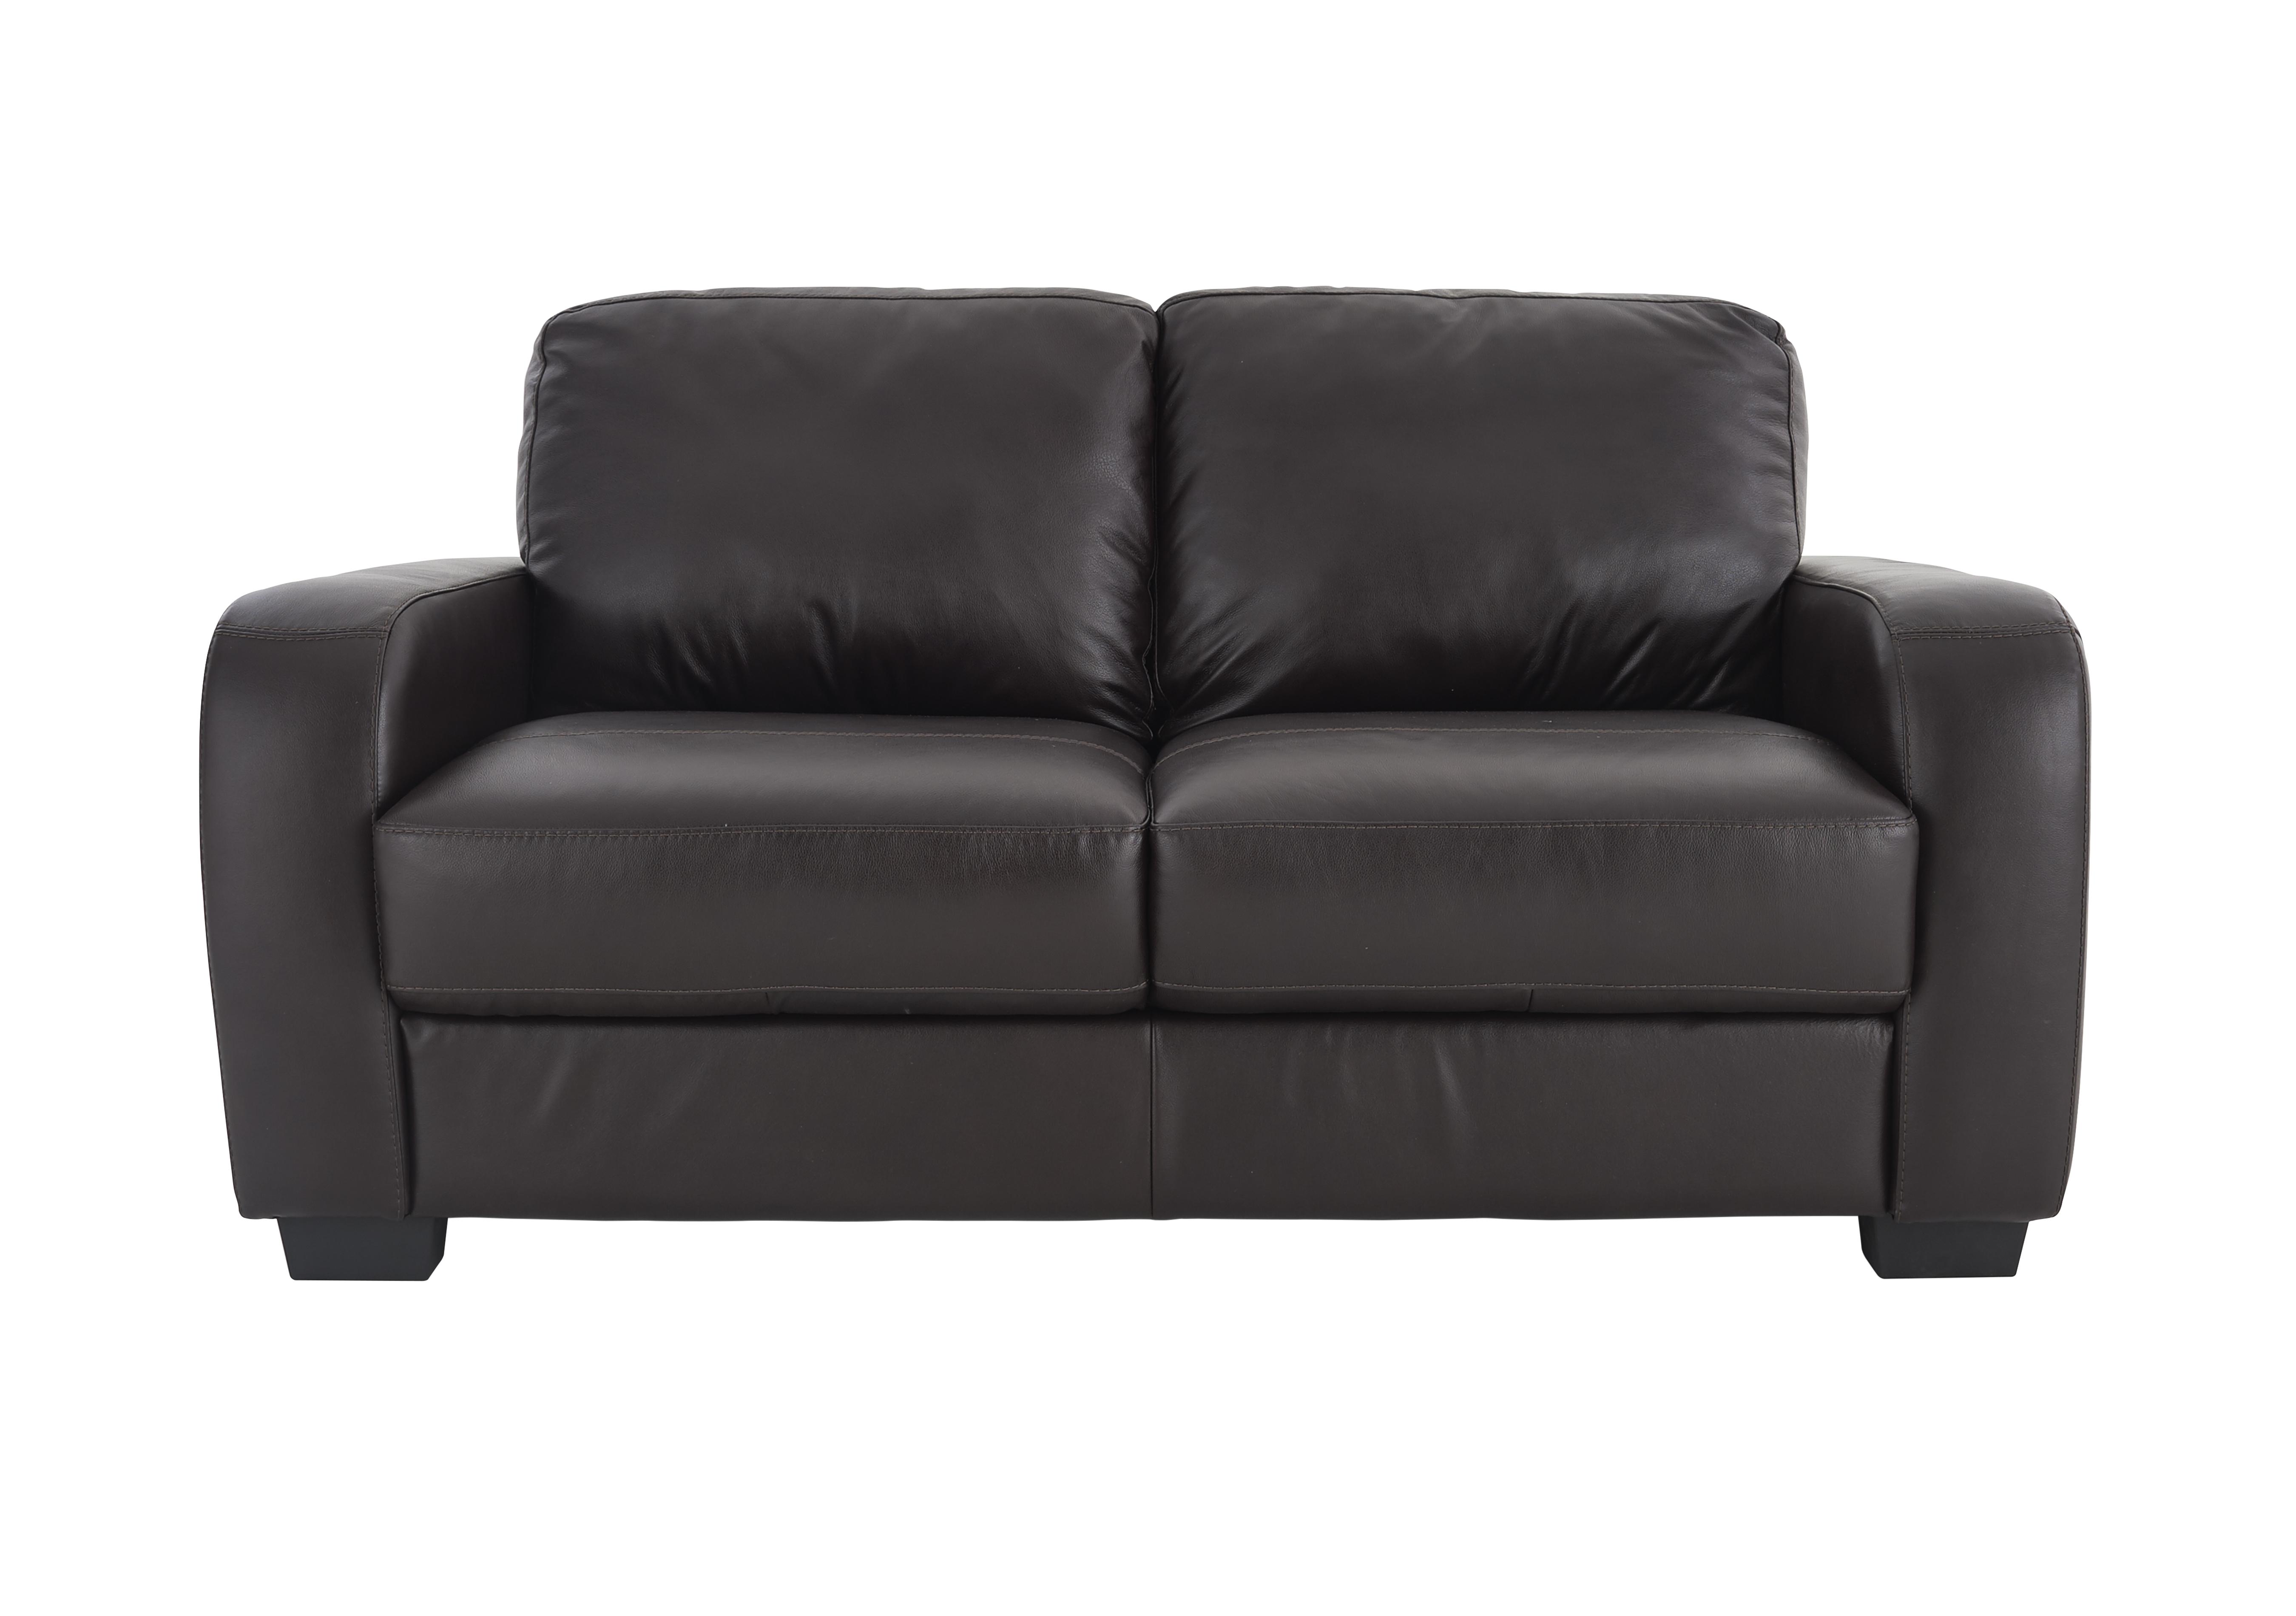 Astor 2 Seater Leather Sofa - World of Leather - Furniture Village